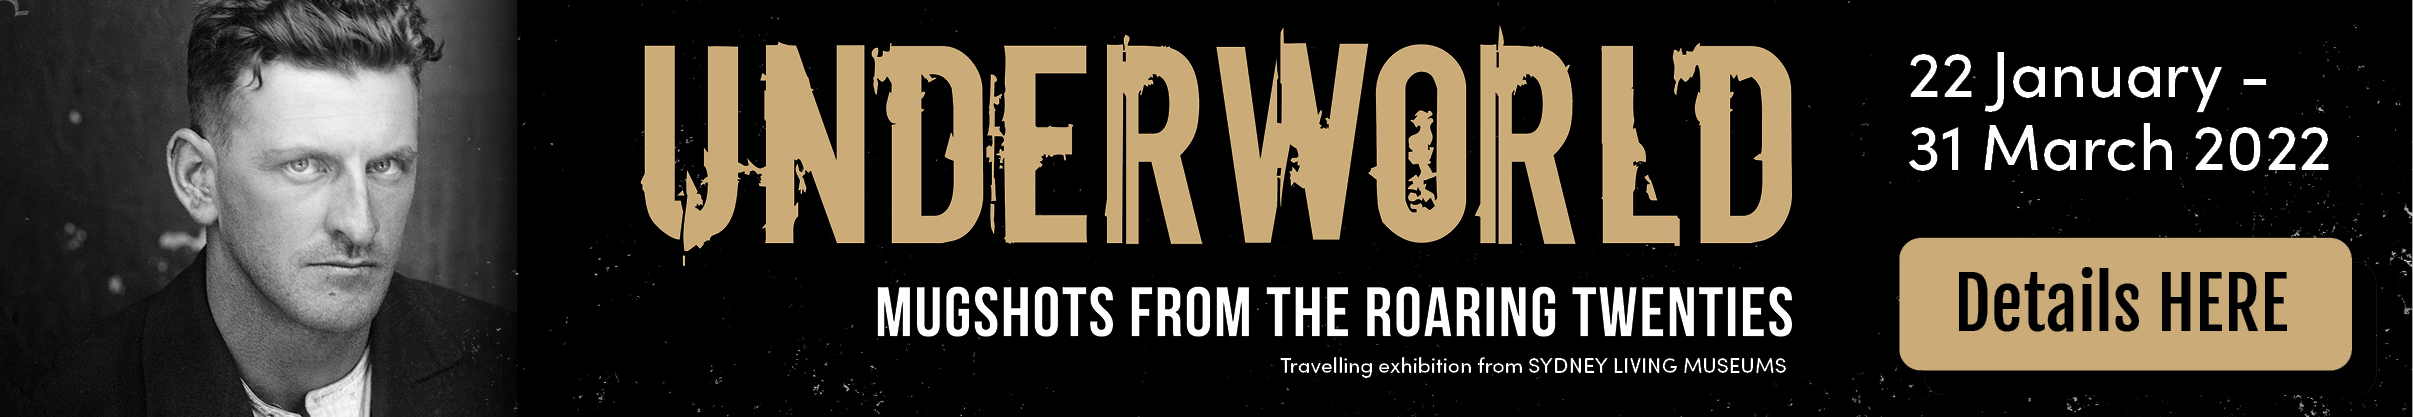 Underworld: Mugshots from the Roaring Twenties is showing at Hinkler Hall of Aviation between 22 January and 31 March.